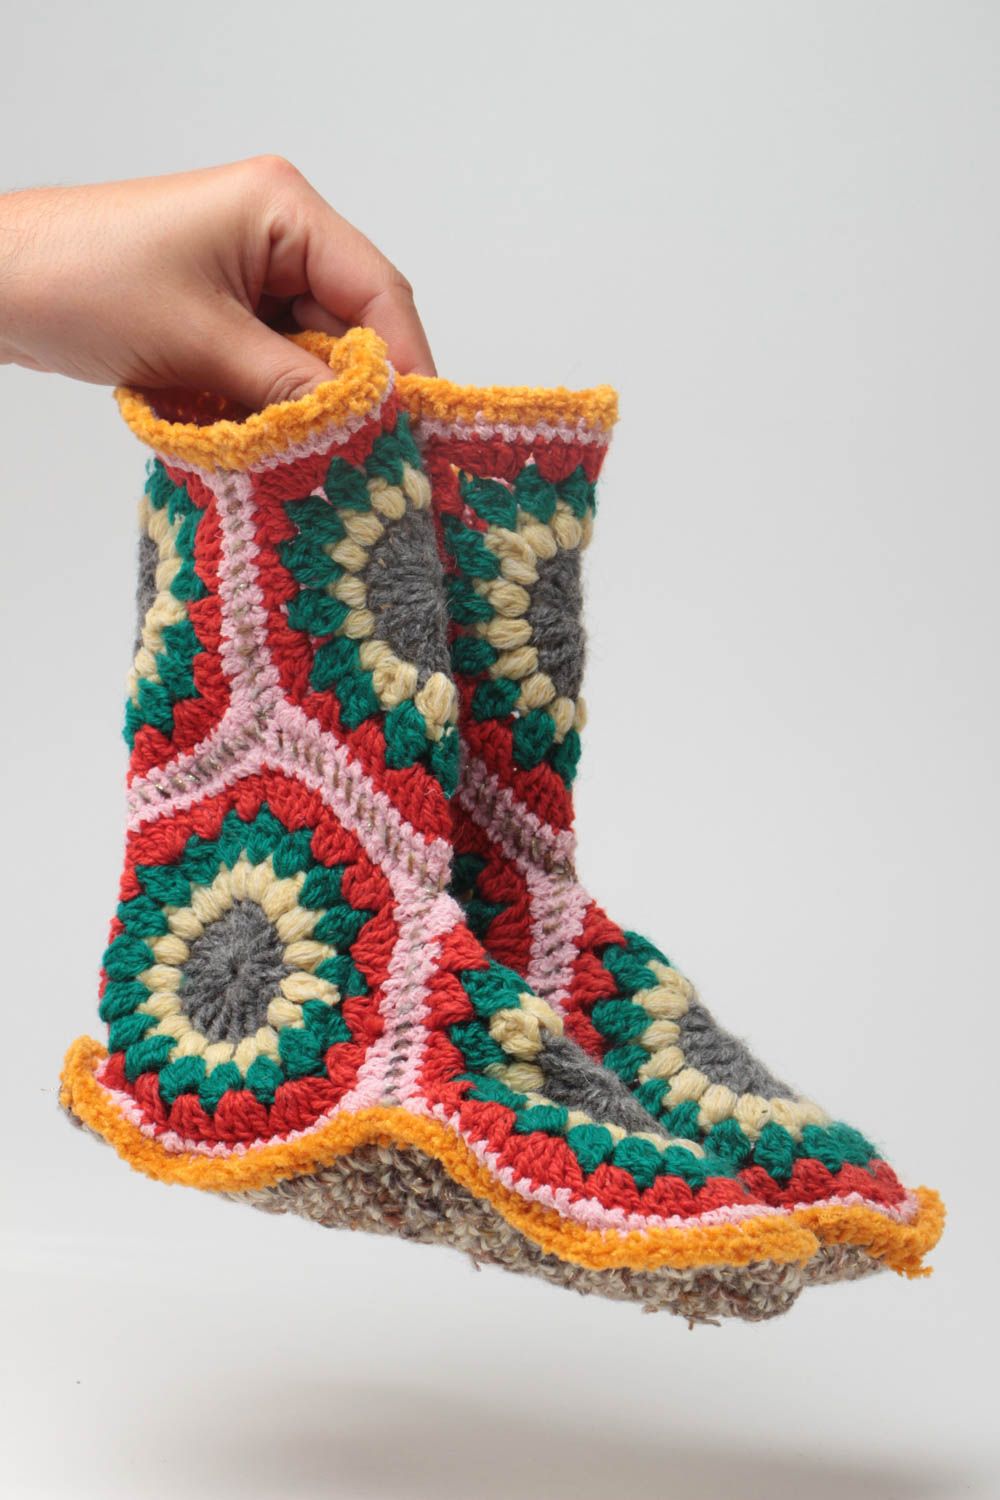 Crochet boots socks handmade colorful comfortable home slippers for winter photo 5